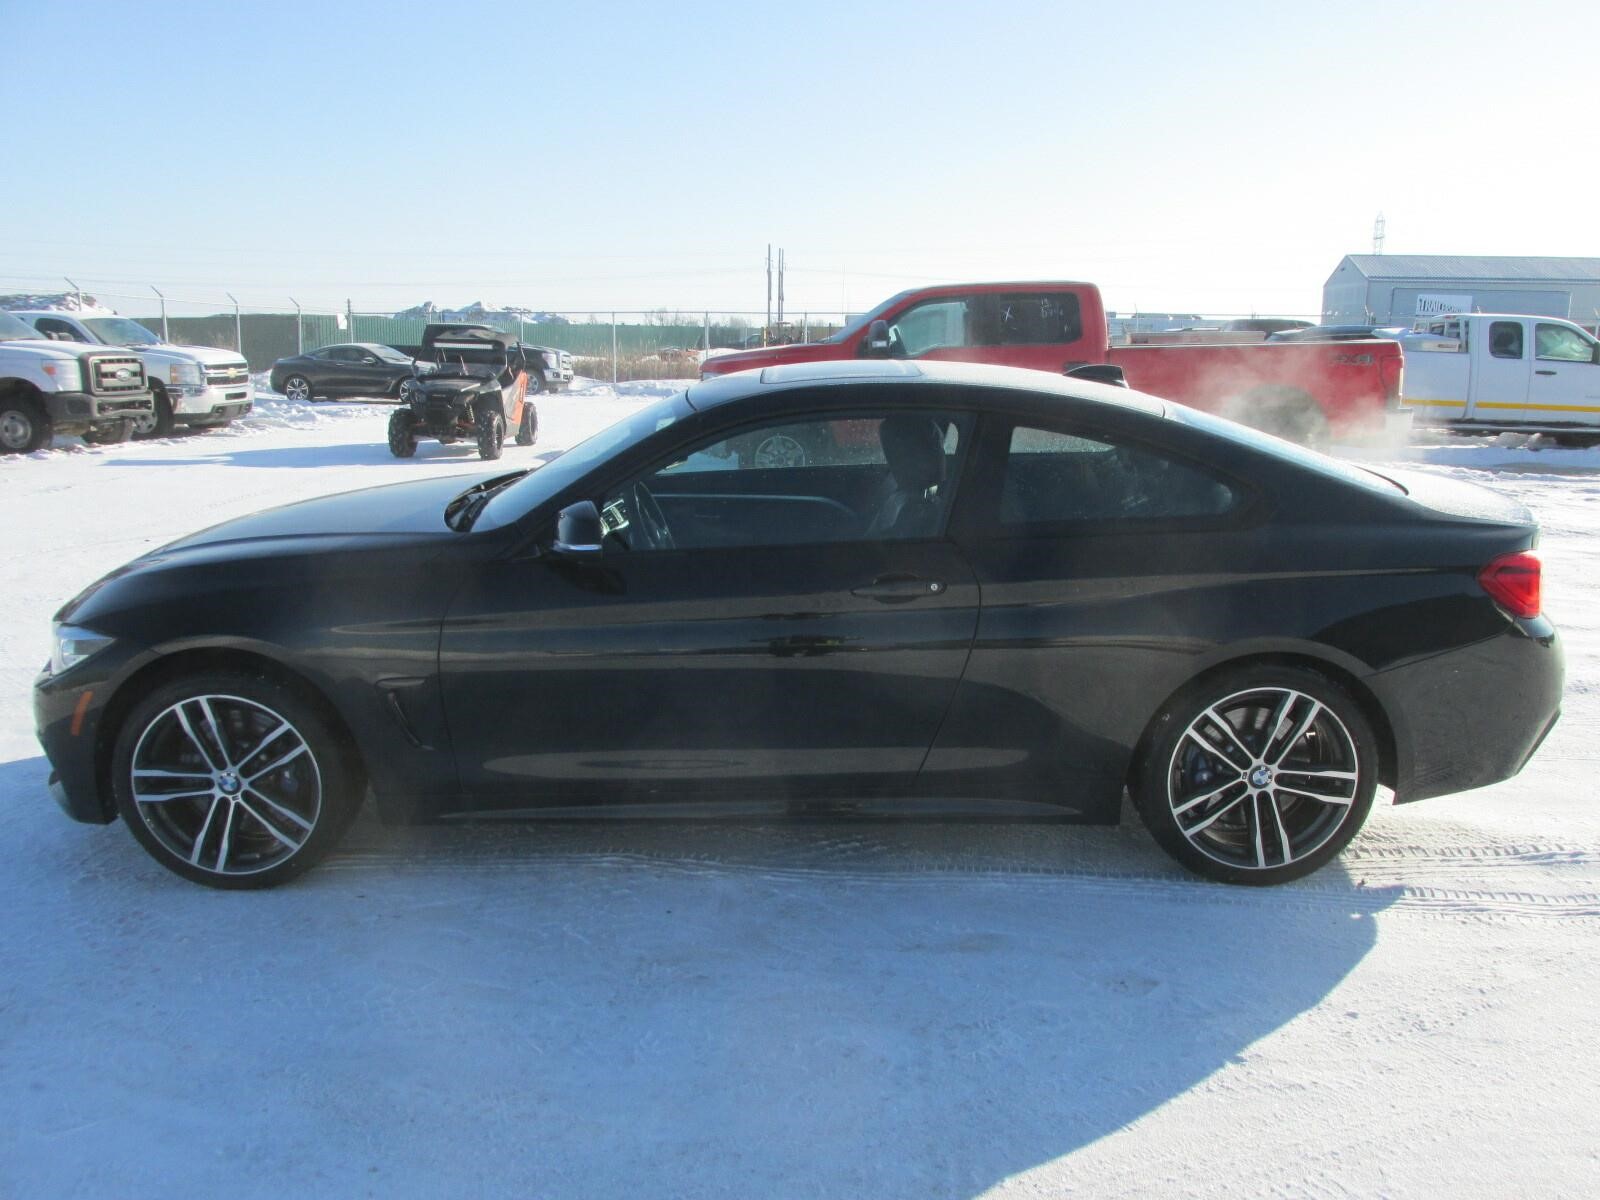 Online Auto Auction March 1 2021 Featuring MTS/Bell Canada